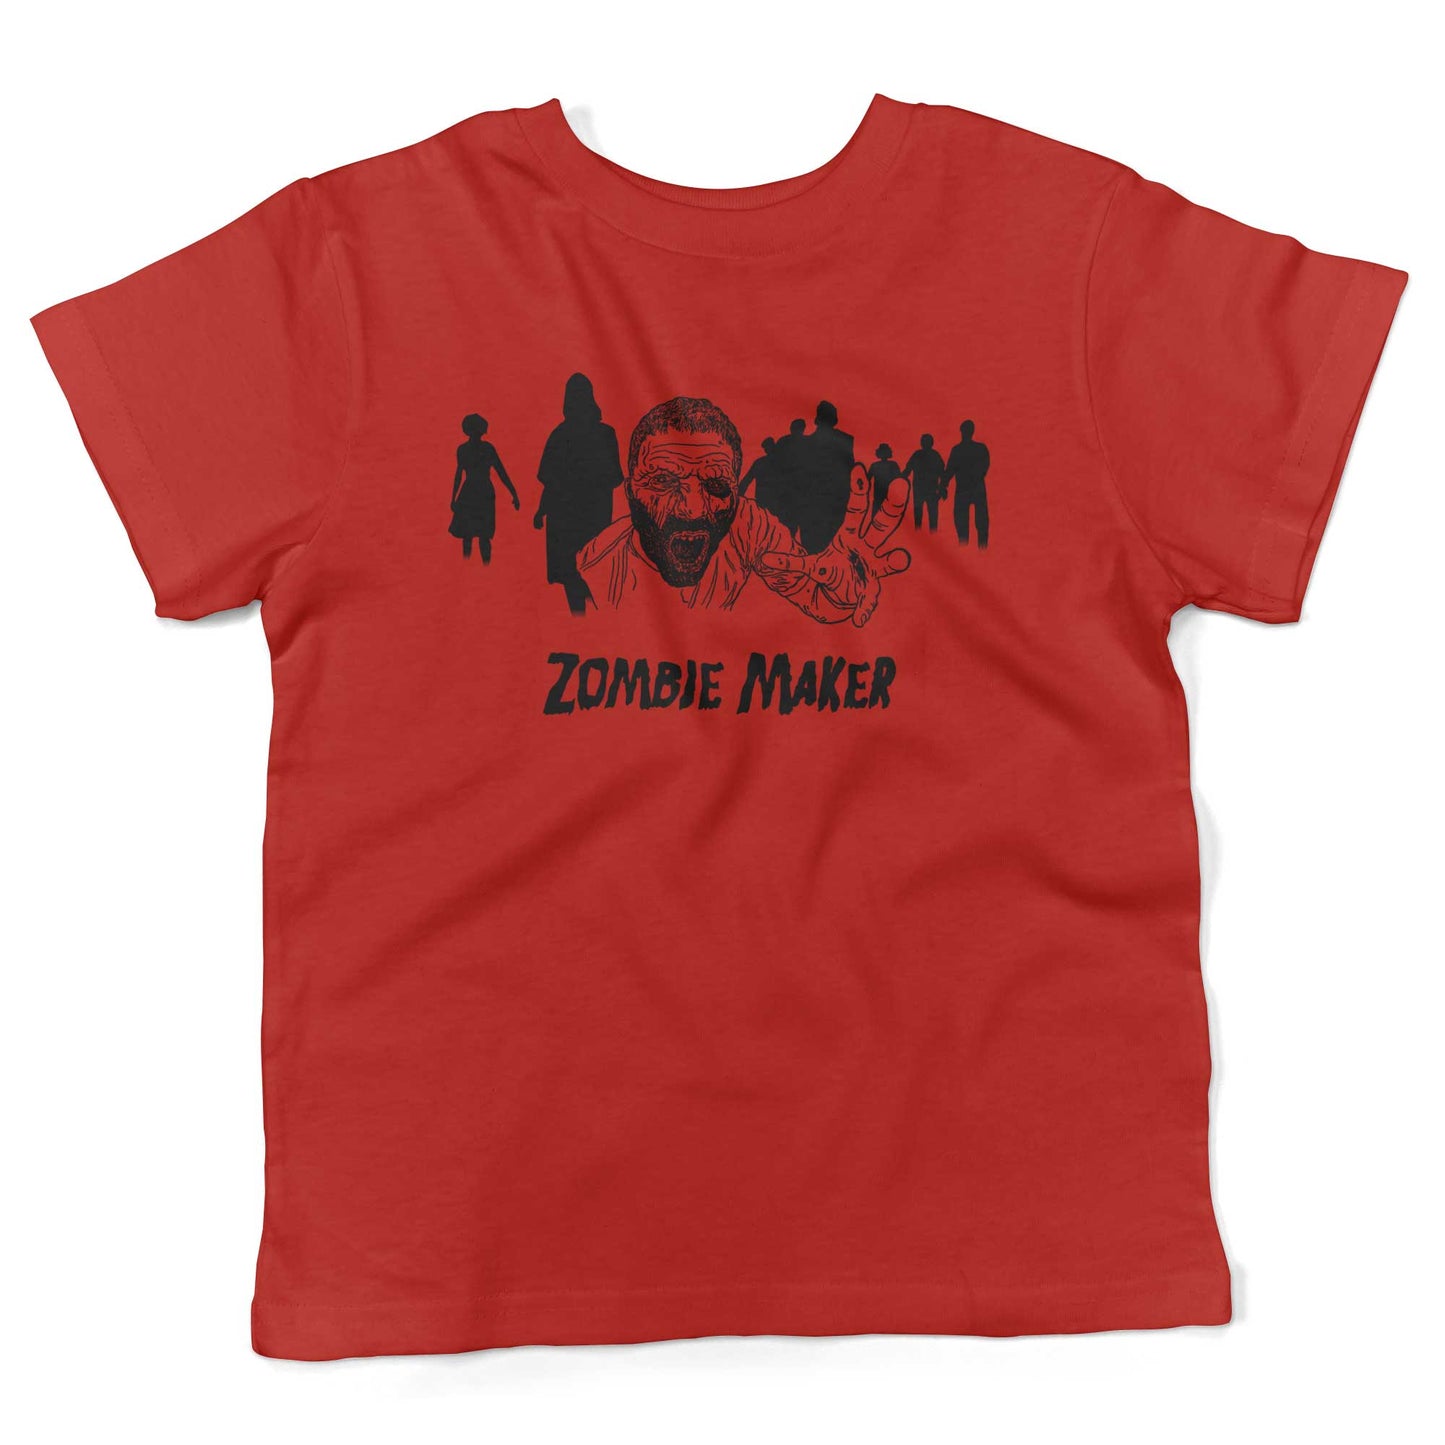 Zombie Maker Toddler Shirt-Red-2T